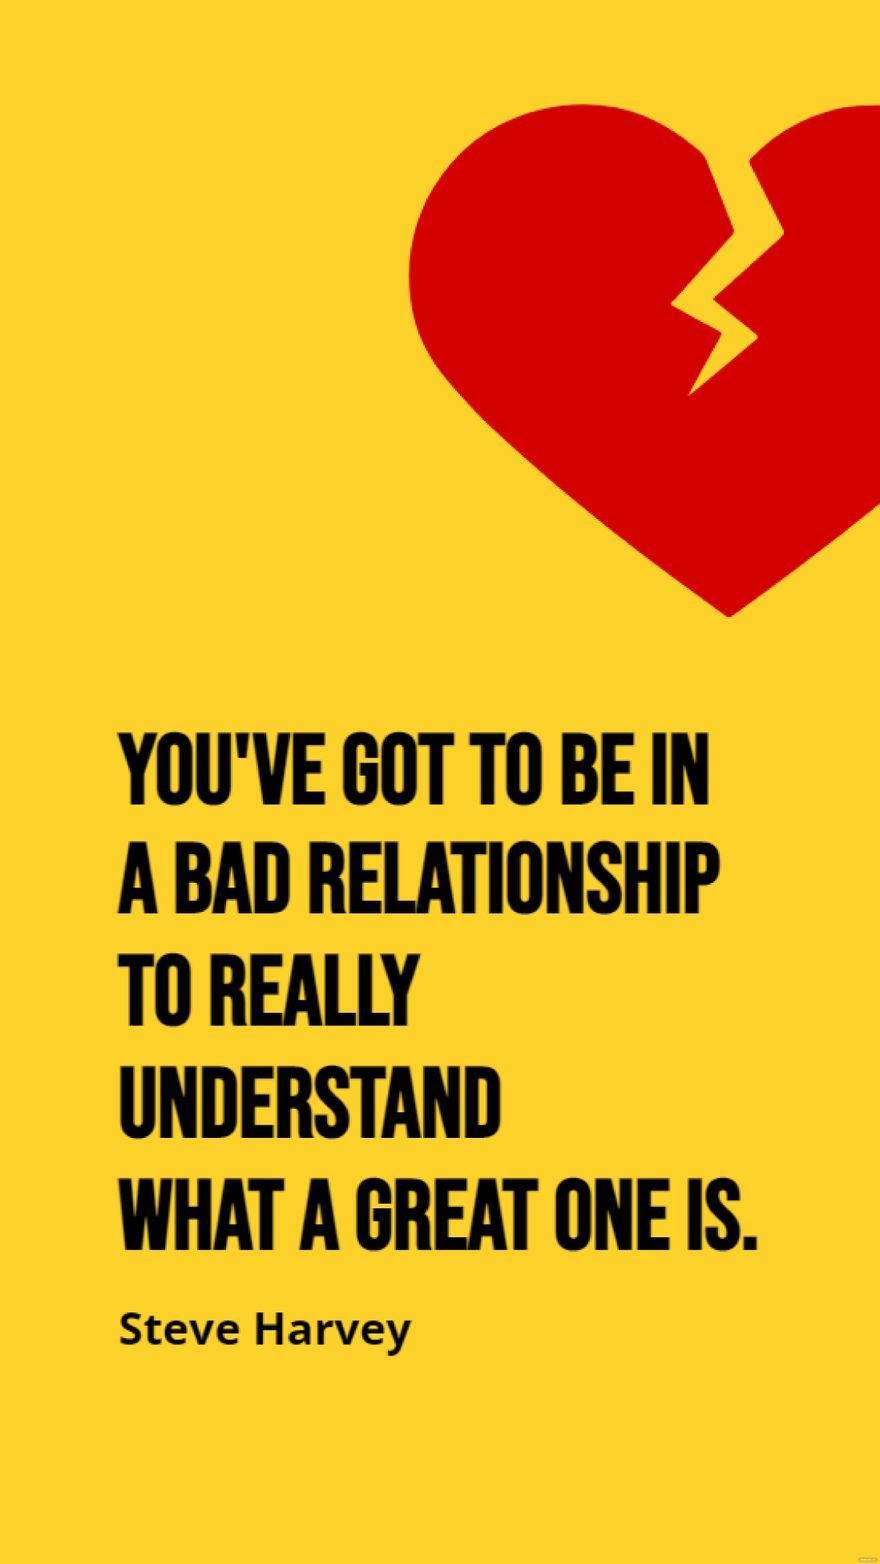 Steve Harvey - You've got to be in a bad relationship to really understand what a great one is.